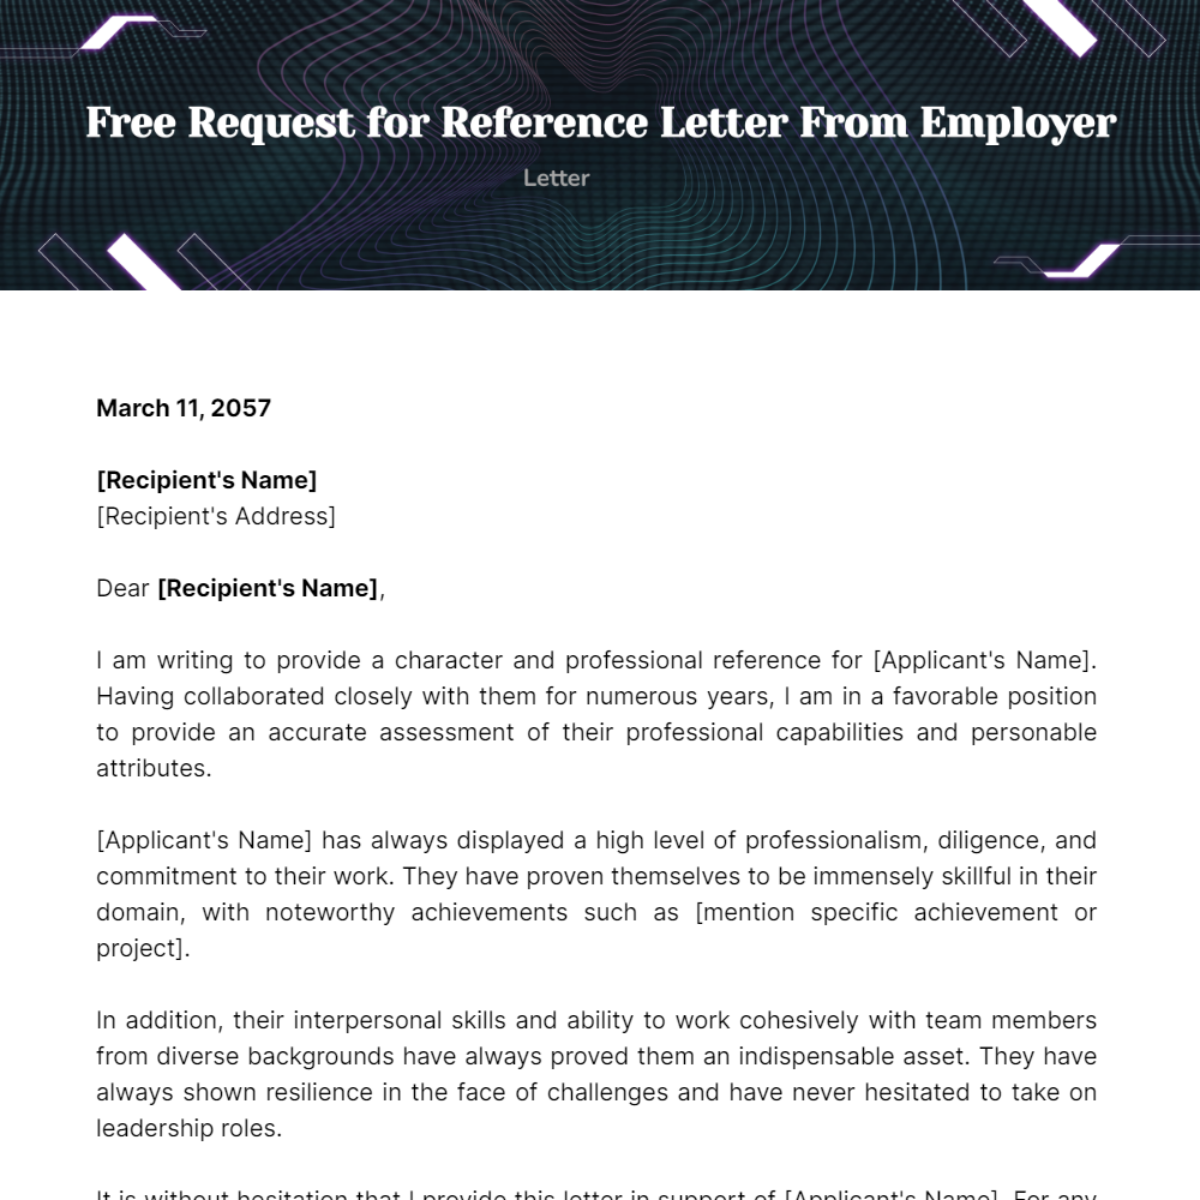 Request for Reference Letter from Employer Template